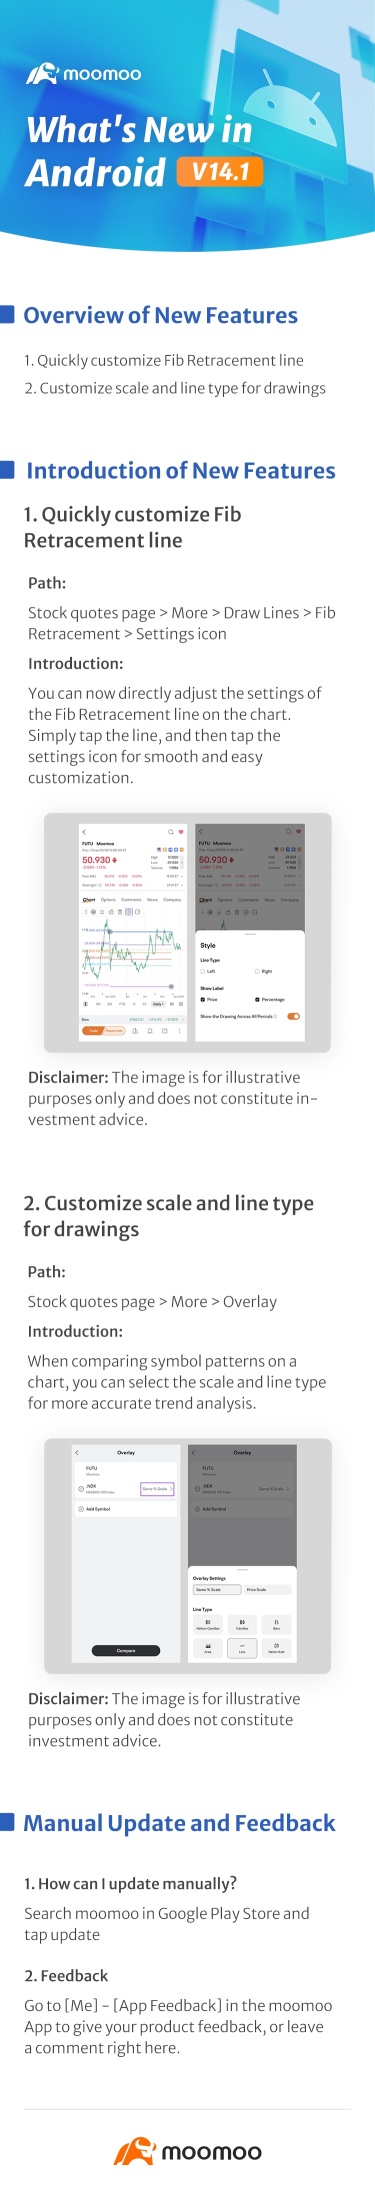 What's New: Customizable Fib Retracement line, scale and line type for drawings available in Android v14.1